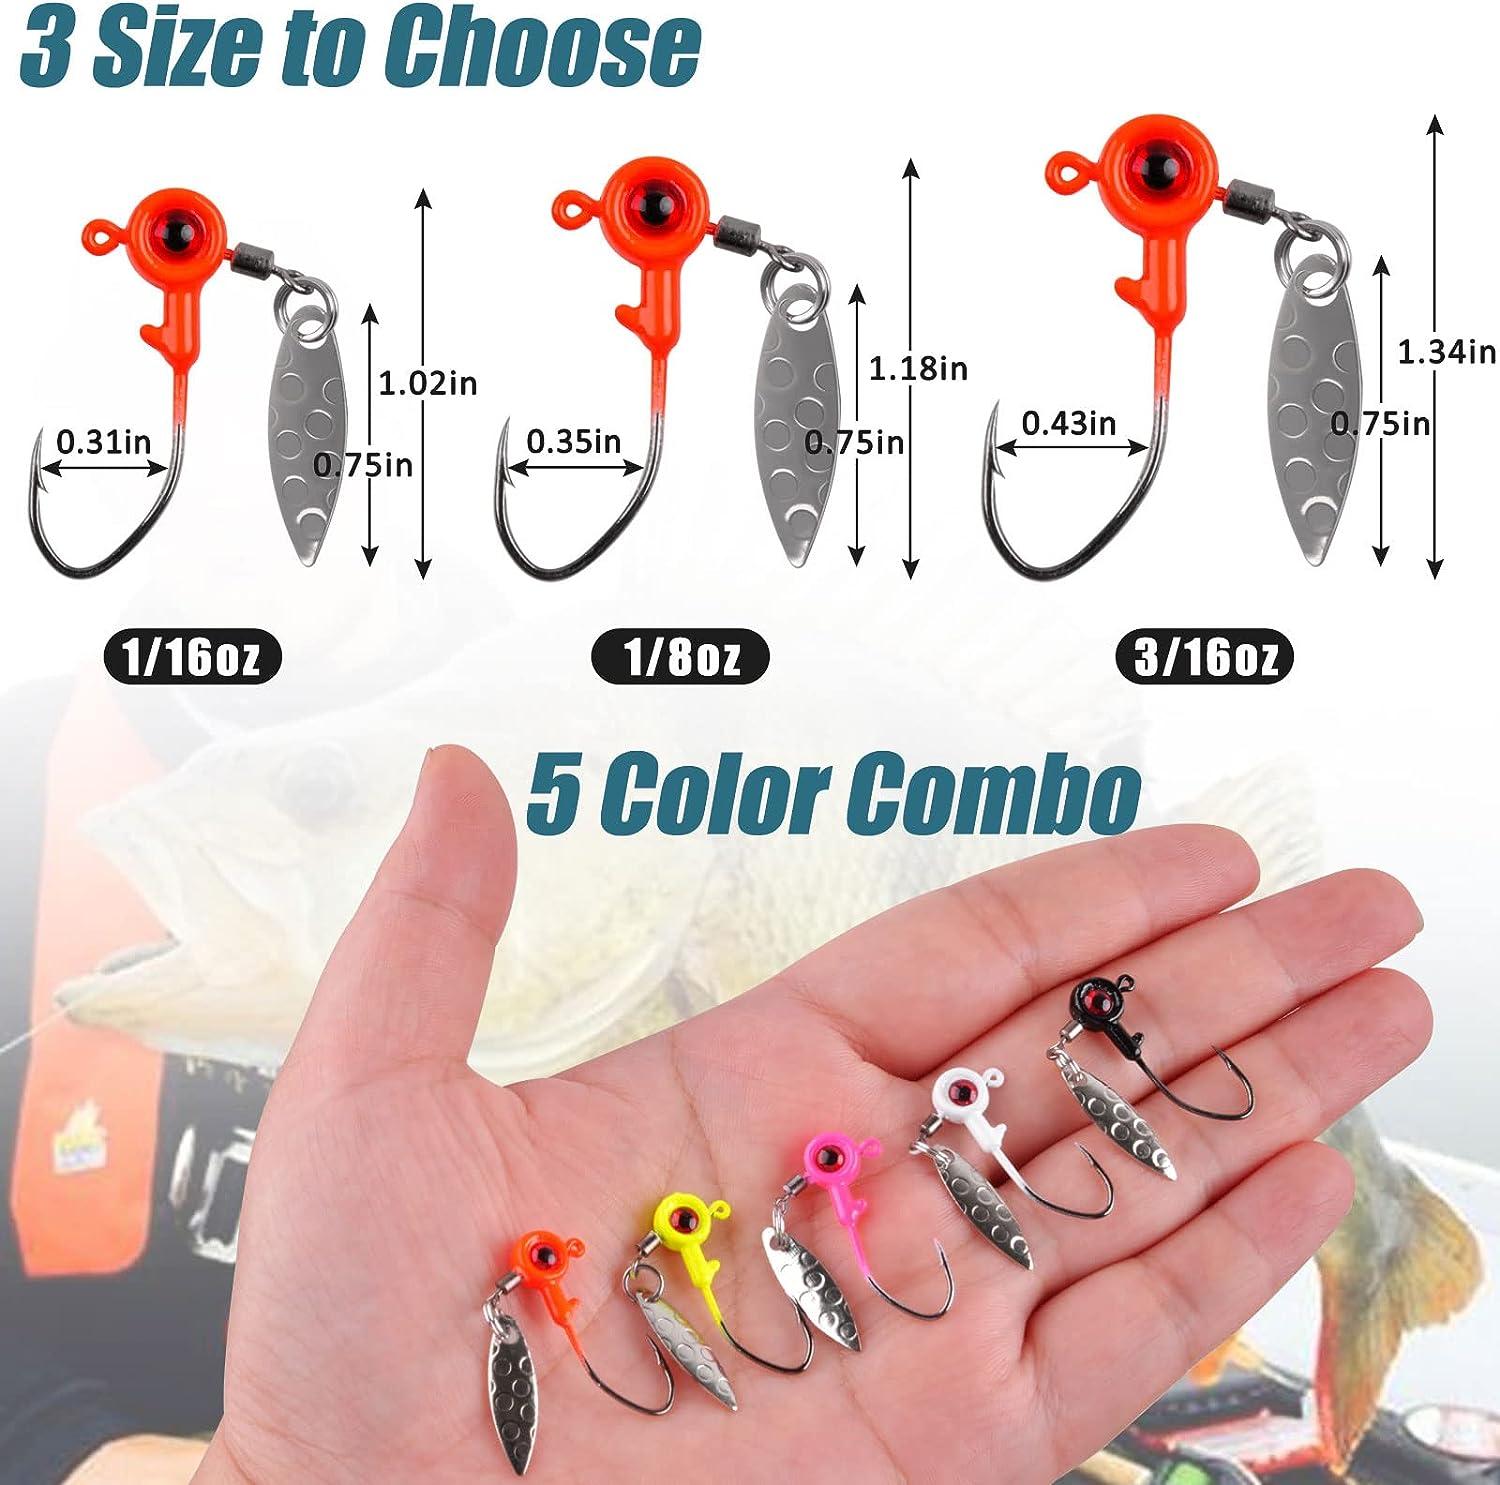 Fishing Jig Heads Kit 20pcs Flat Round Ball Head 3D Eyes Crappie Jig Head  with Spinner Blade Spin Jig Head Hooks for Bass Trout Walleye 1/8oz-20pcs